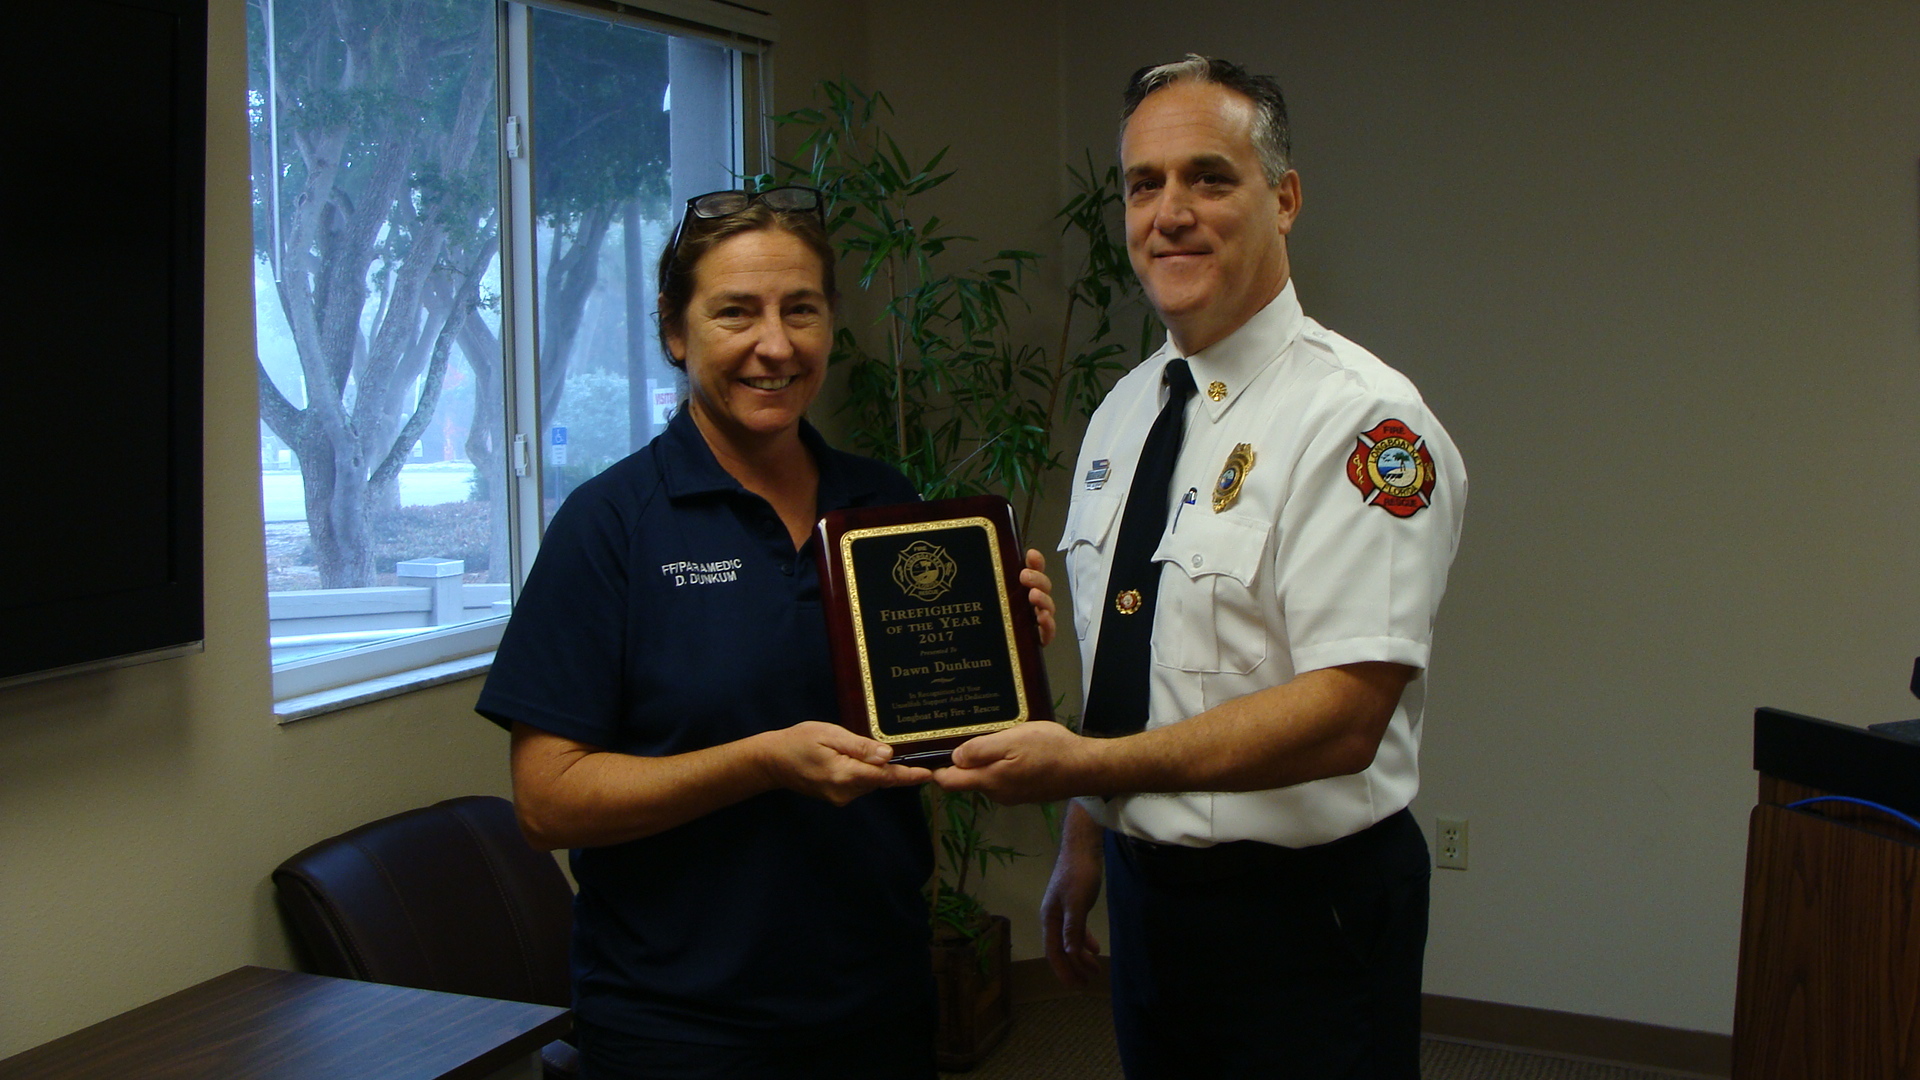 Chief Dezzi presents Dawn Dunkum with the  Firefighter of the Year Award.  Courtesy photo